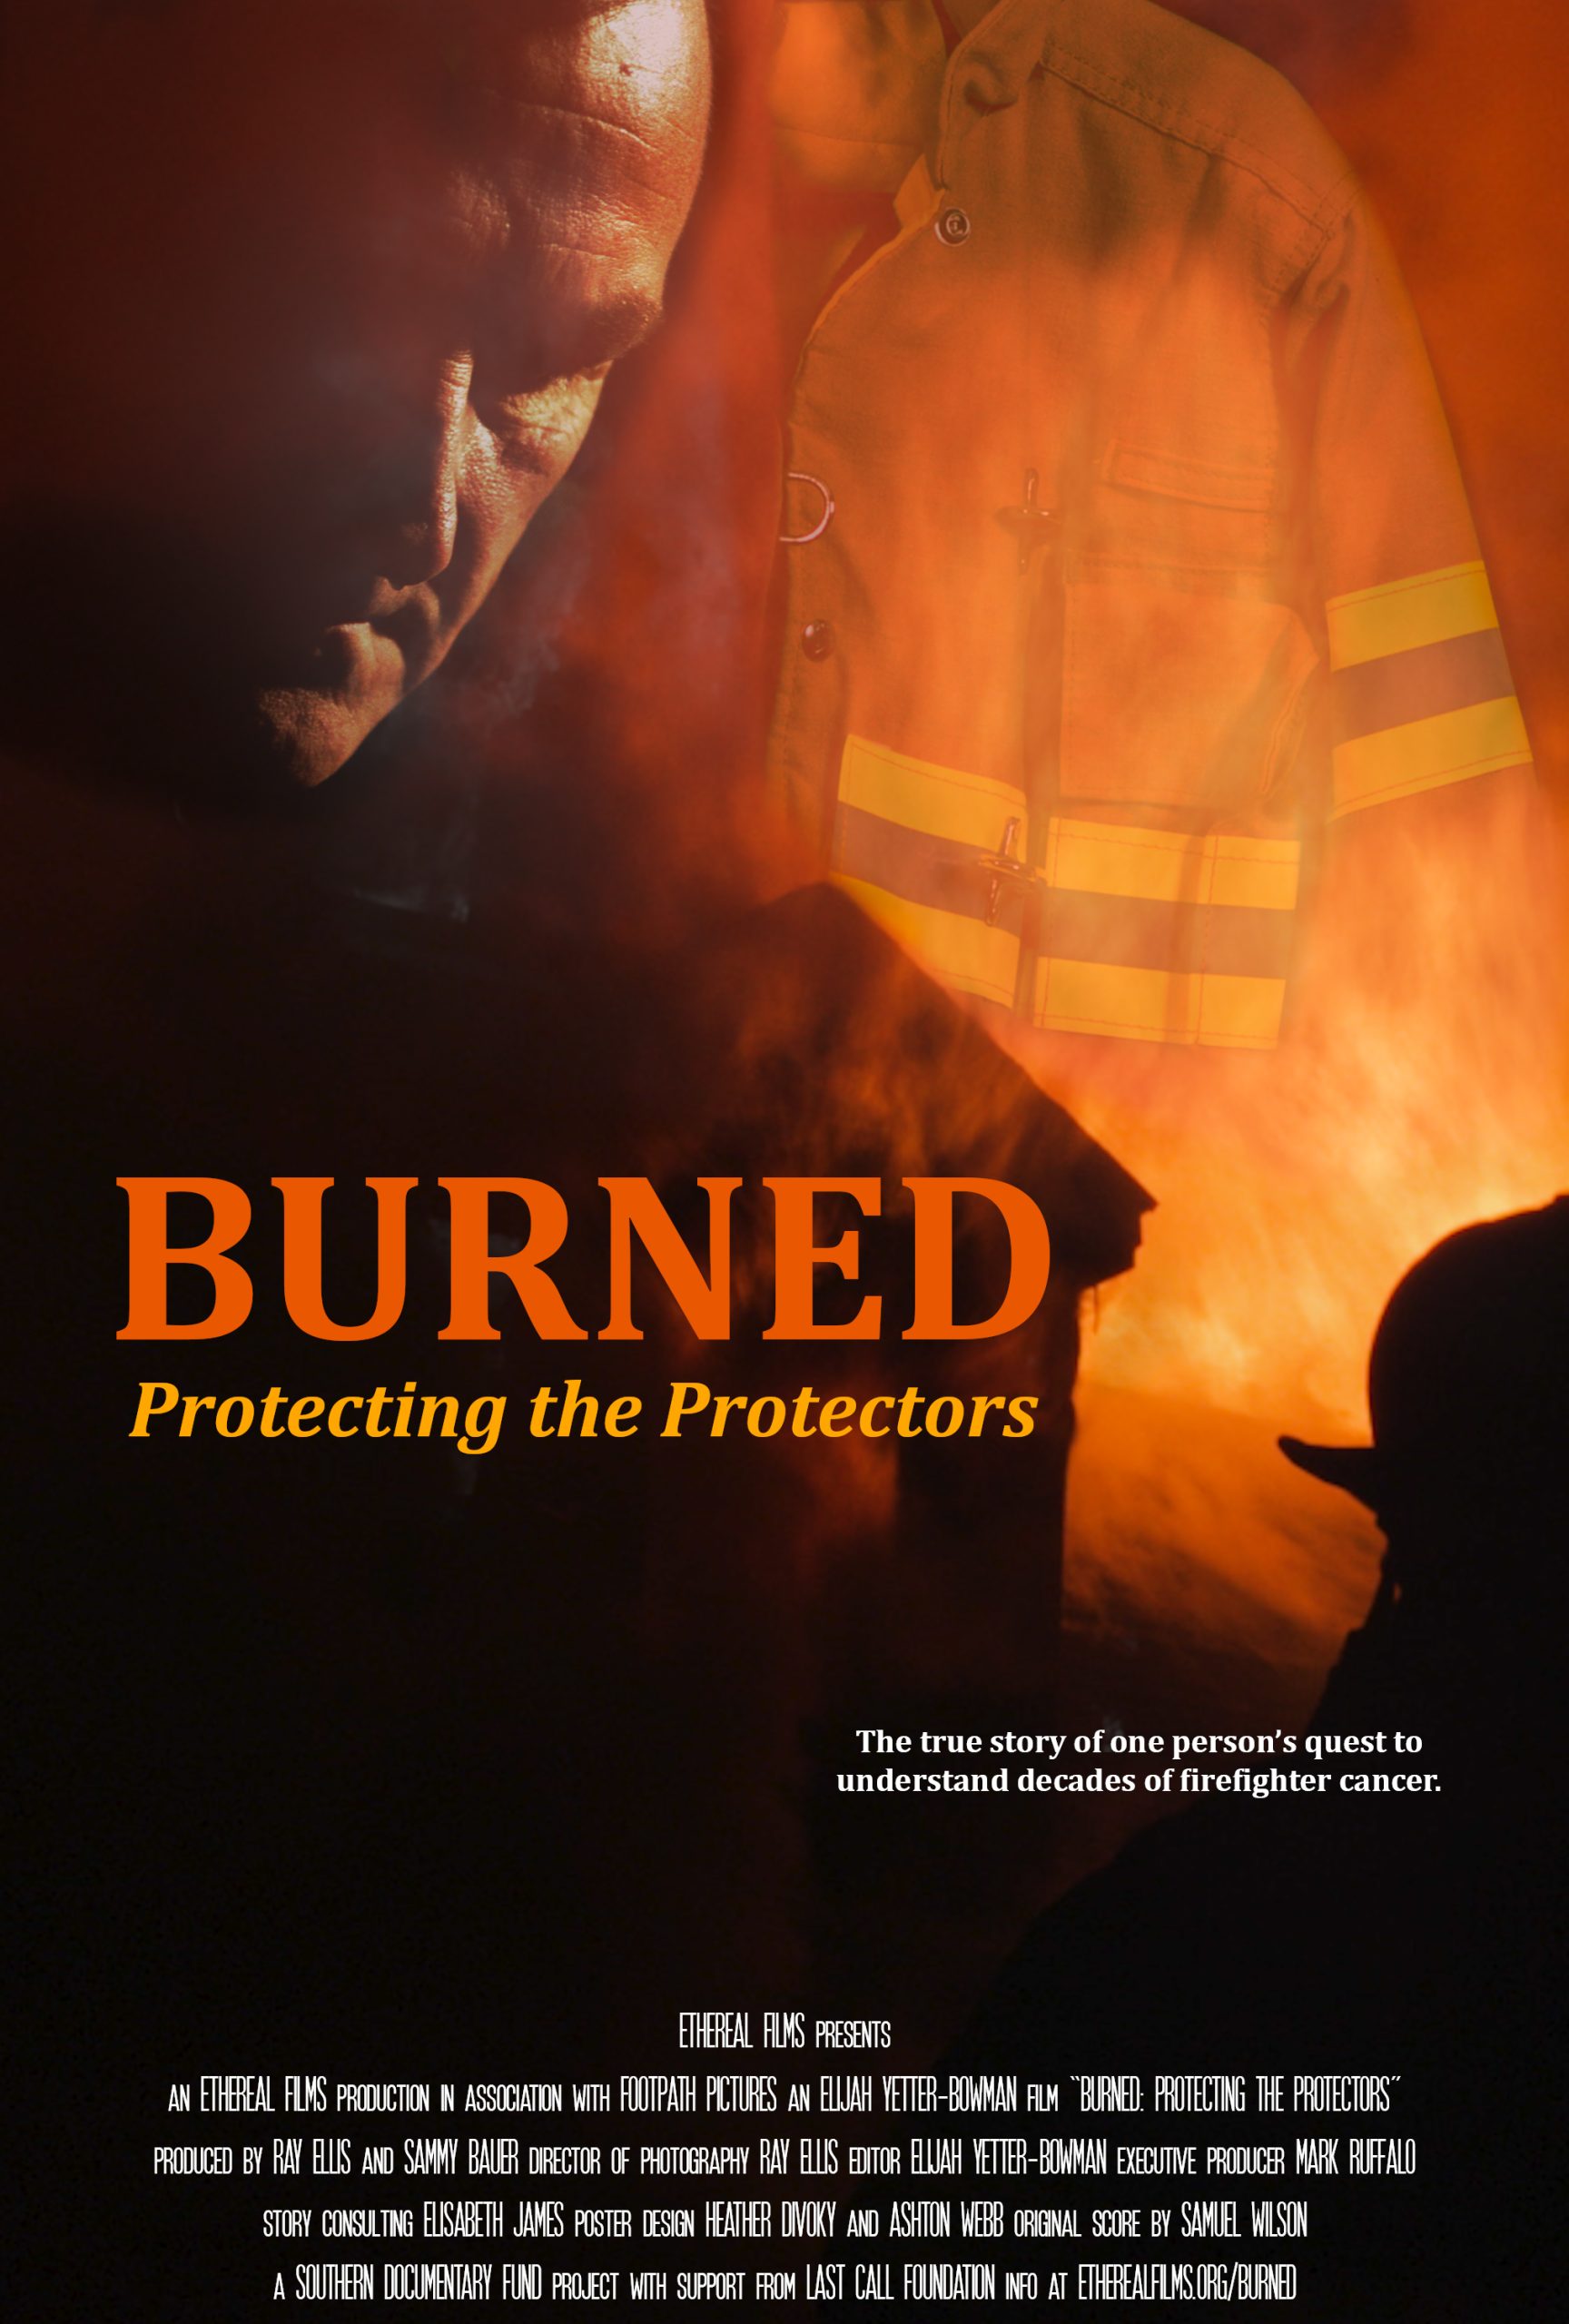 Theatrical poster for "Burned: Protecting the Protectors" shows an older white male with his head bowed. A firefighters coat hangs in the background as the silhouette of a house appears to burn.